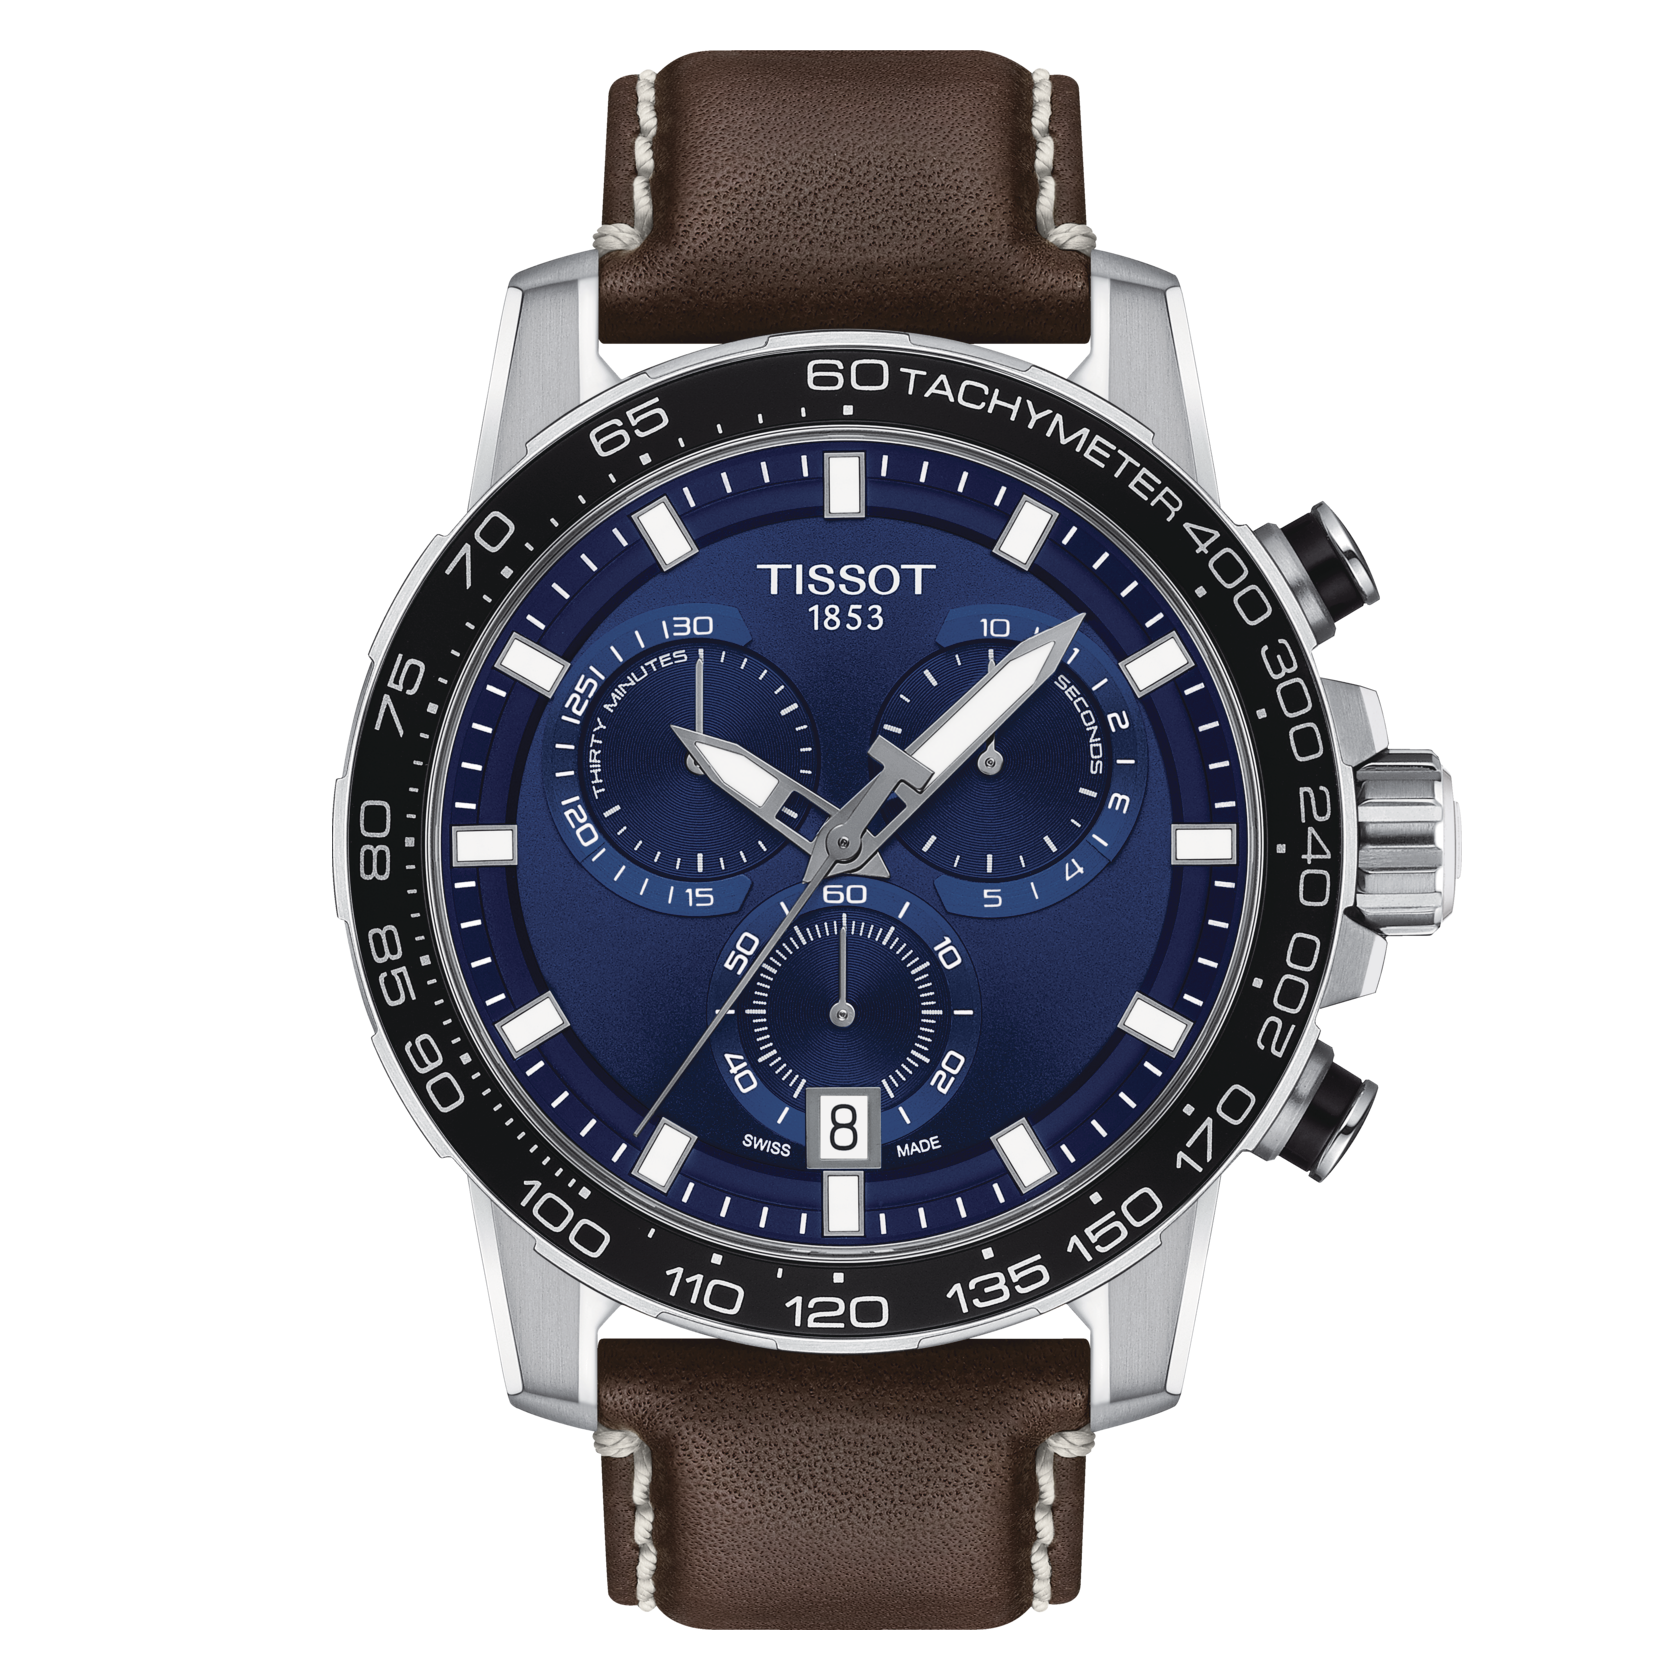 5 Reasons to Buy a Tissot Watch - First Class Watches Blog